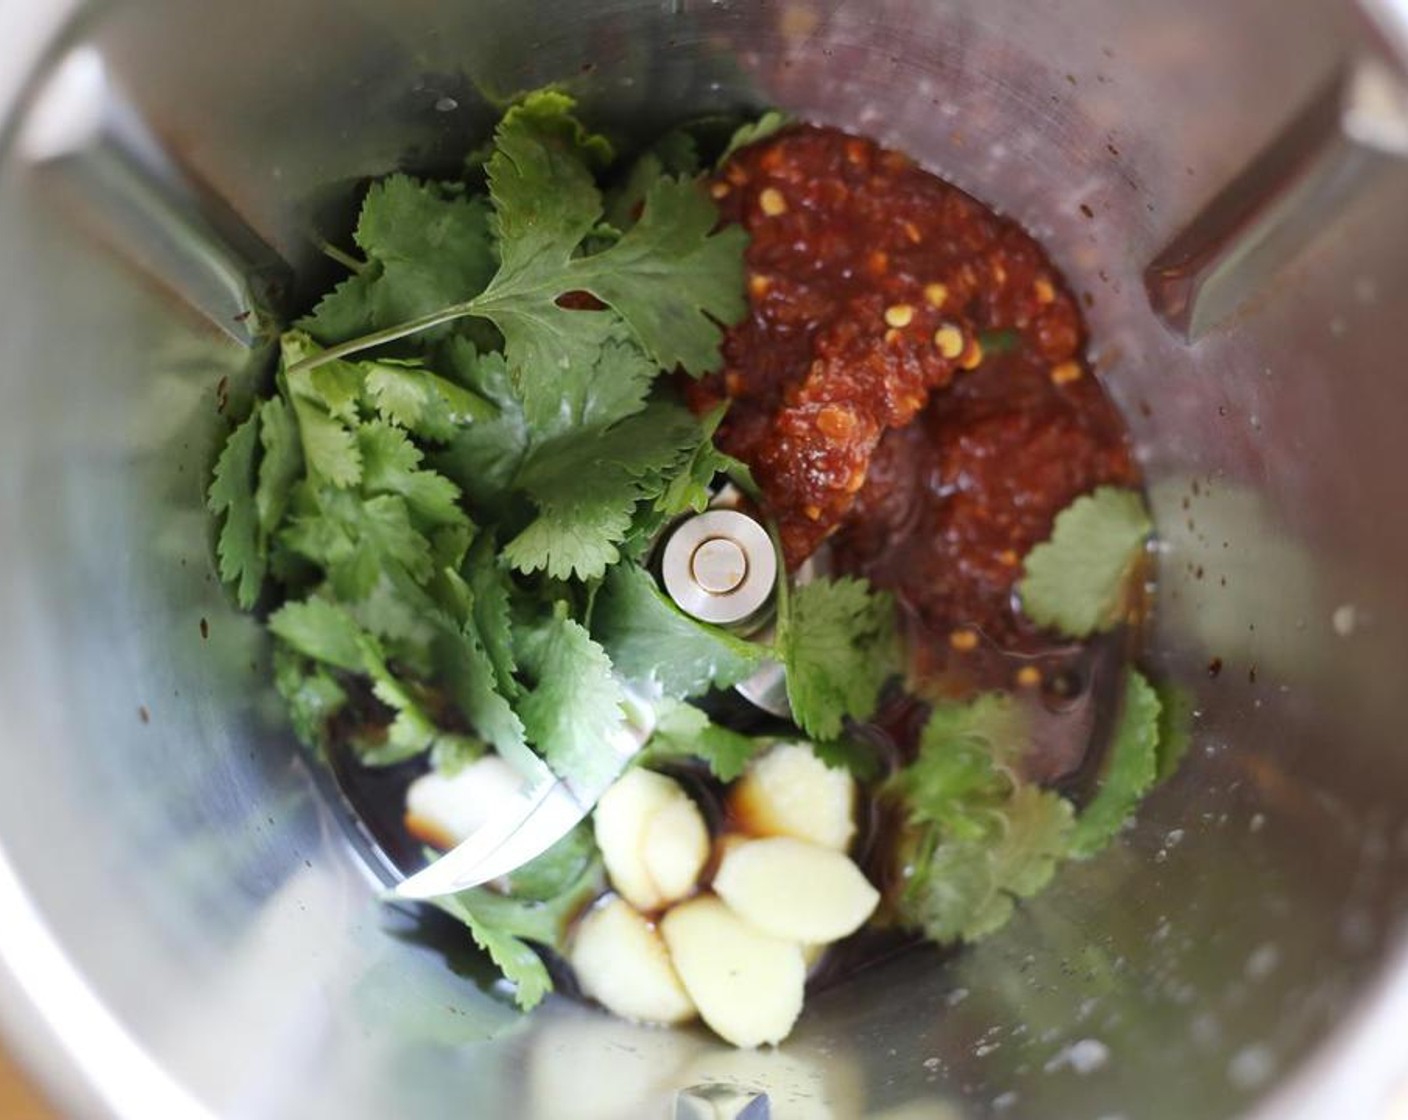 step 1 To make the marinade, combine the Soy Sauce (1/4 cup), Fresh Cilantro (1/4 cup), Garlic (4 cloves), Sambal (3 Tbsp), juice from Lime (1) and Fresh Ginger (1 tsp) in a high-speed blender.